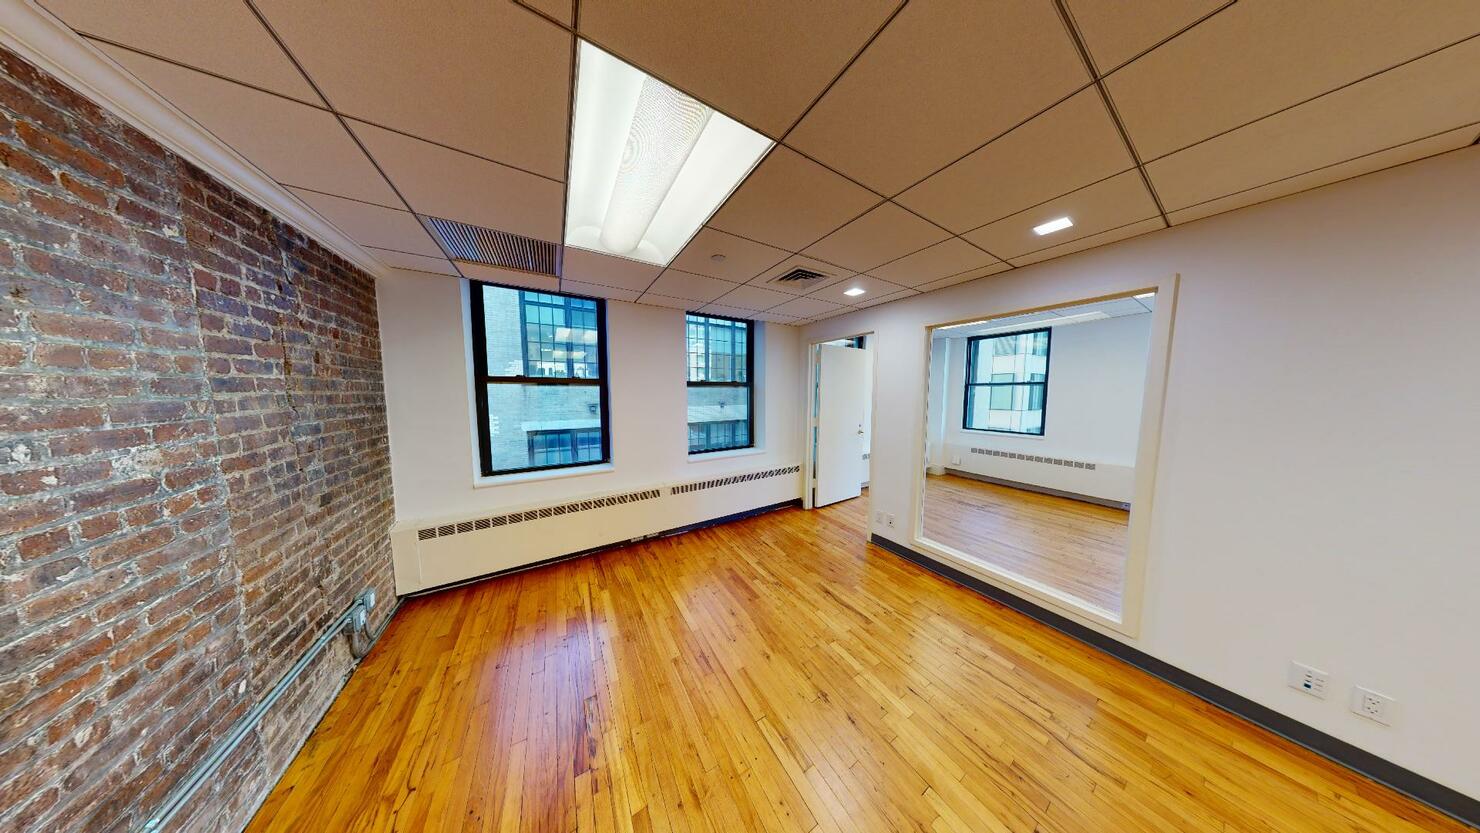 483 Tenth Avenue Office Space - Office Room with Brick Walls